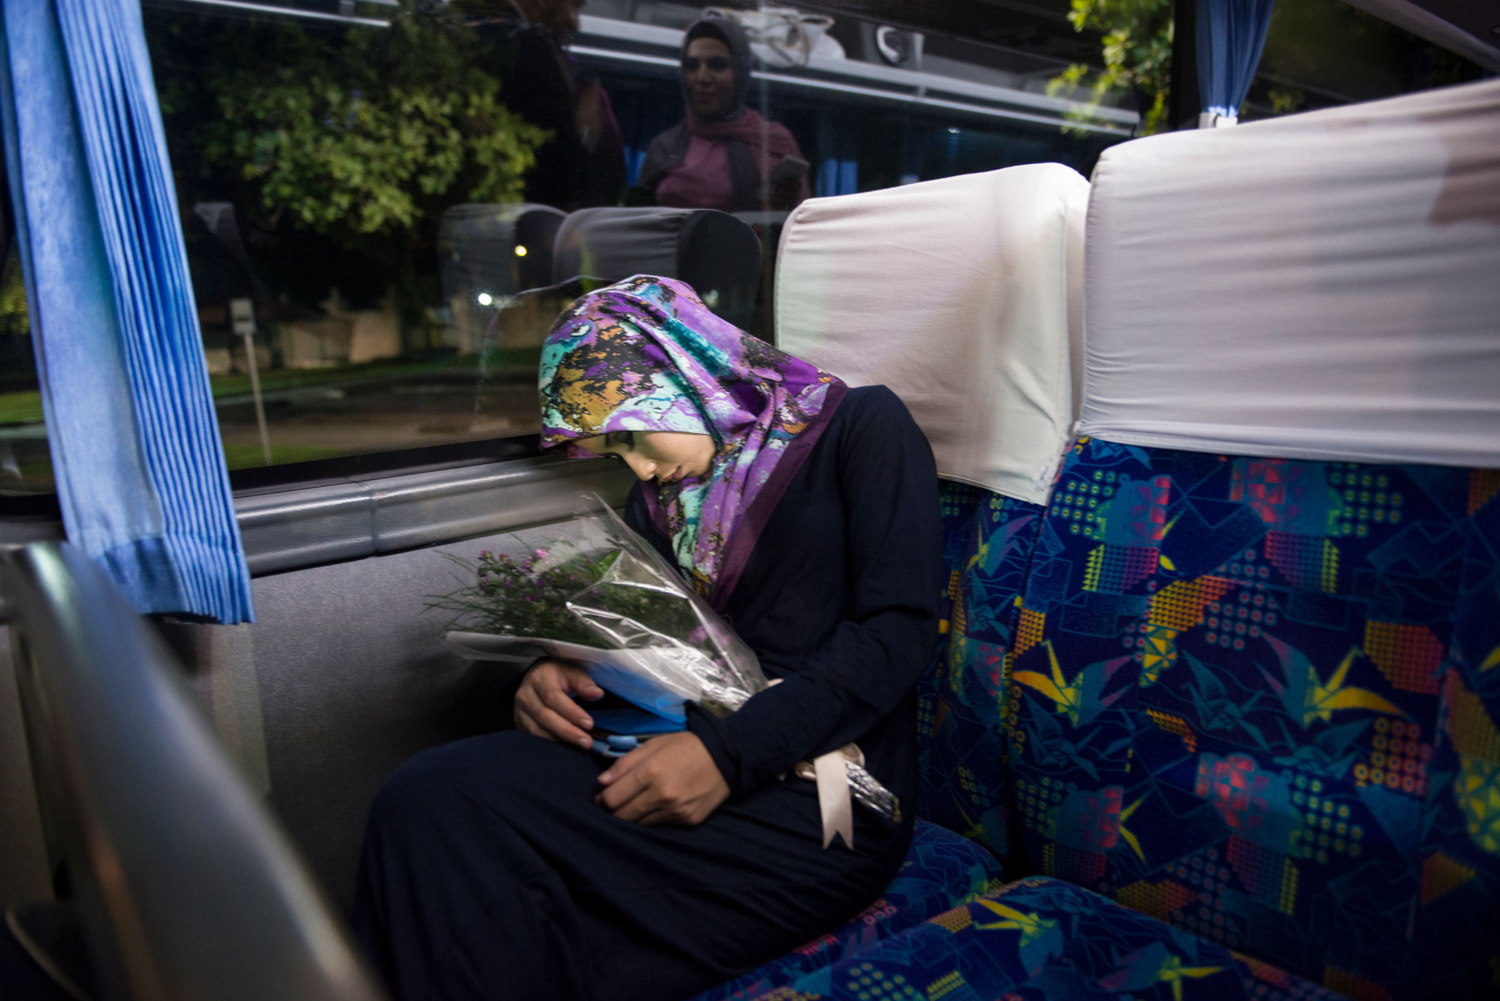  Miss Malaysia falls asleep while holding her flowers on November 21st, 2014 in Yogakarta, Indonesia. 